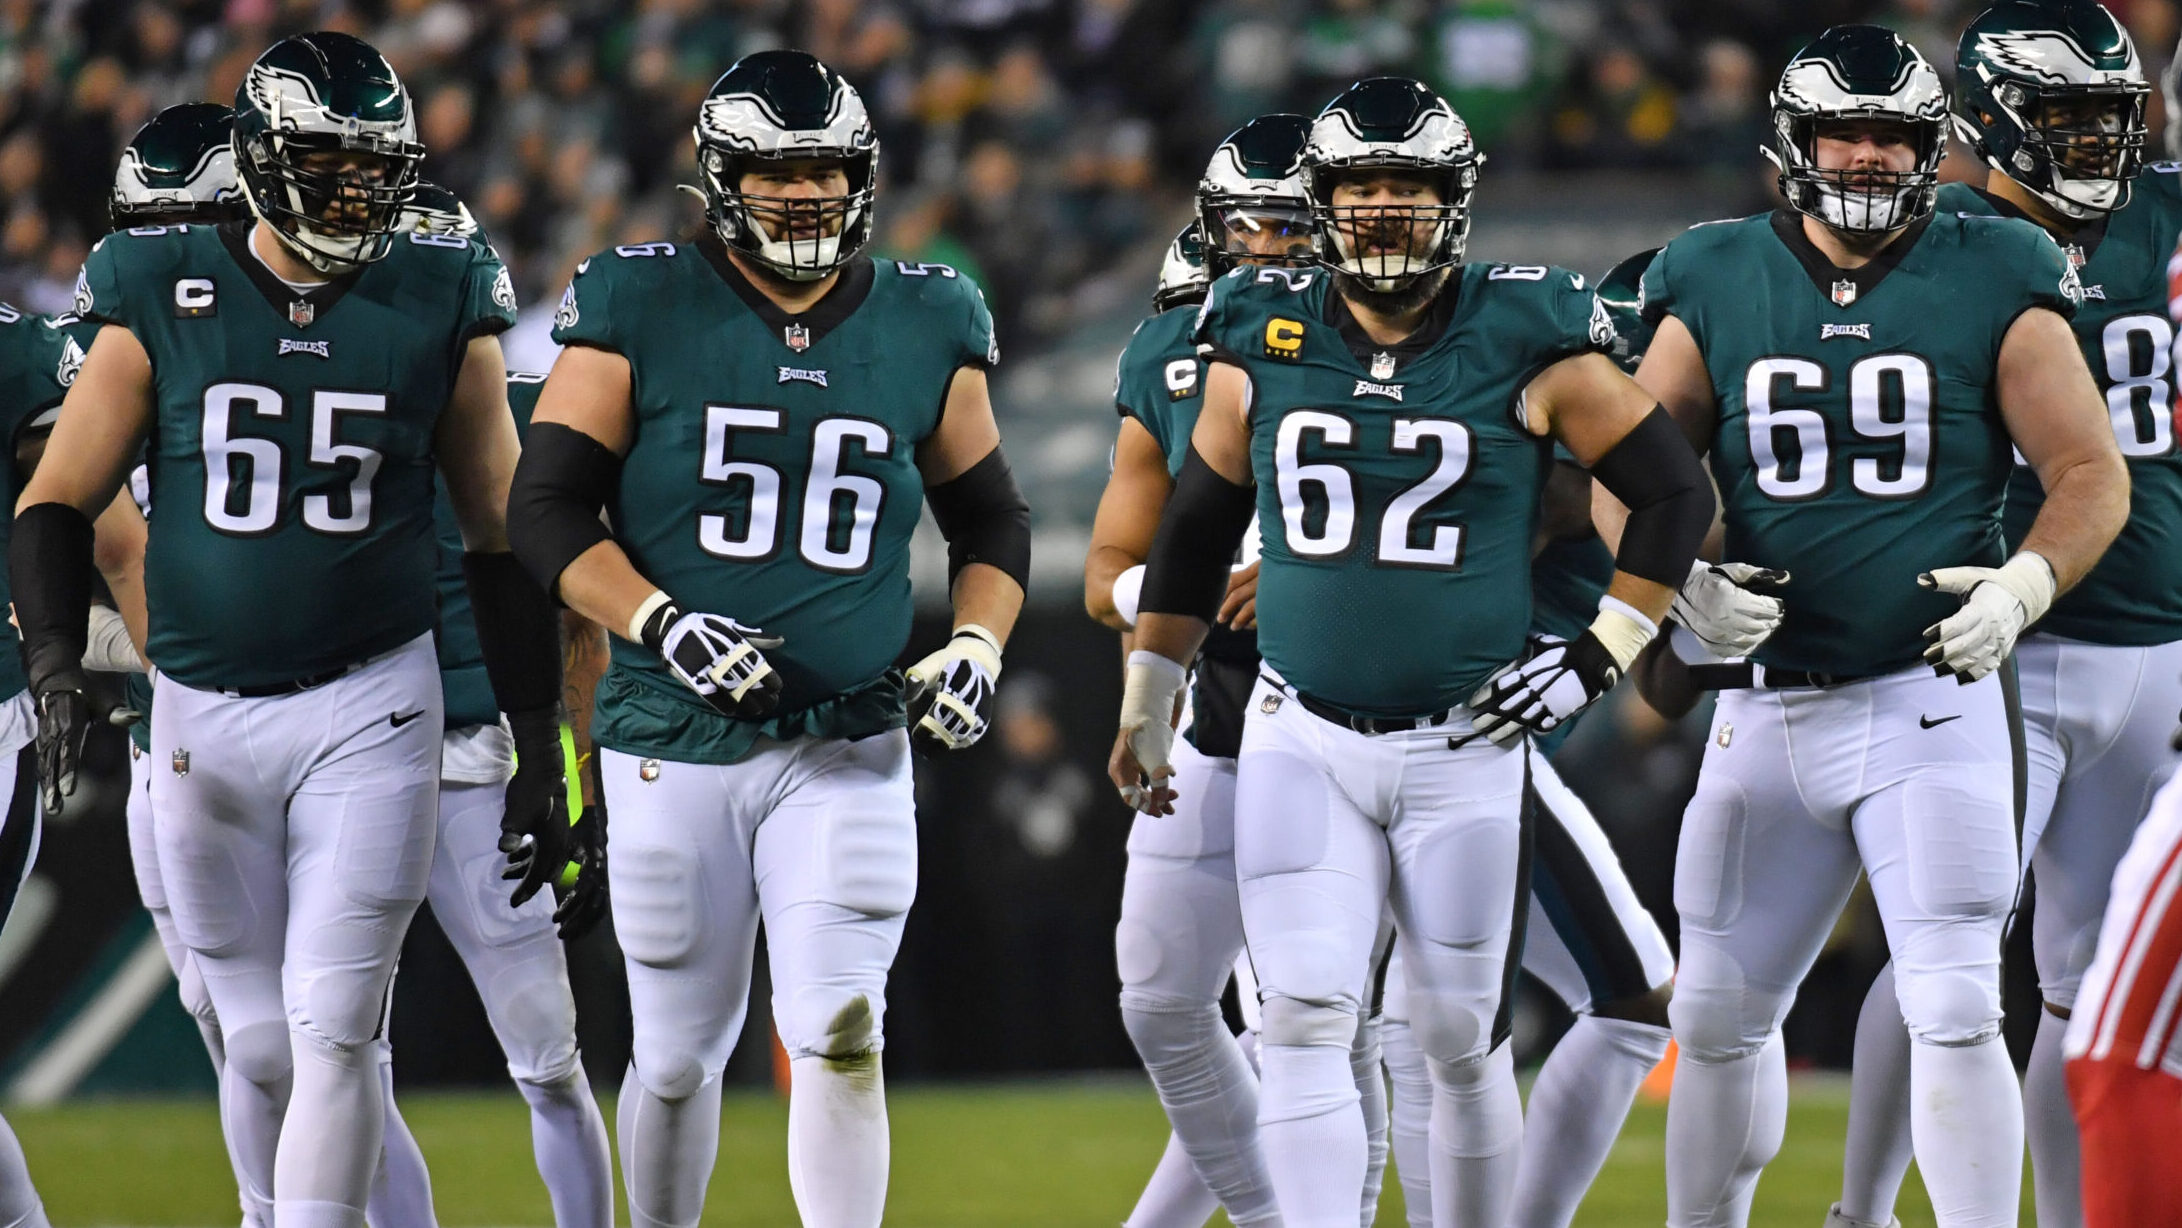 Offensive Line Dominance Cleared Eagles’ Lane to Super Bowl